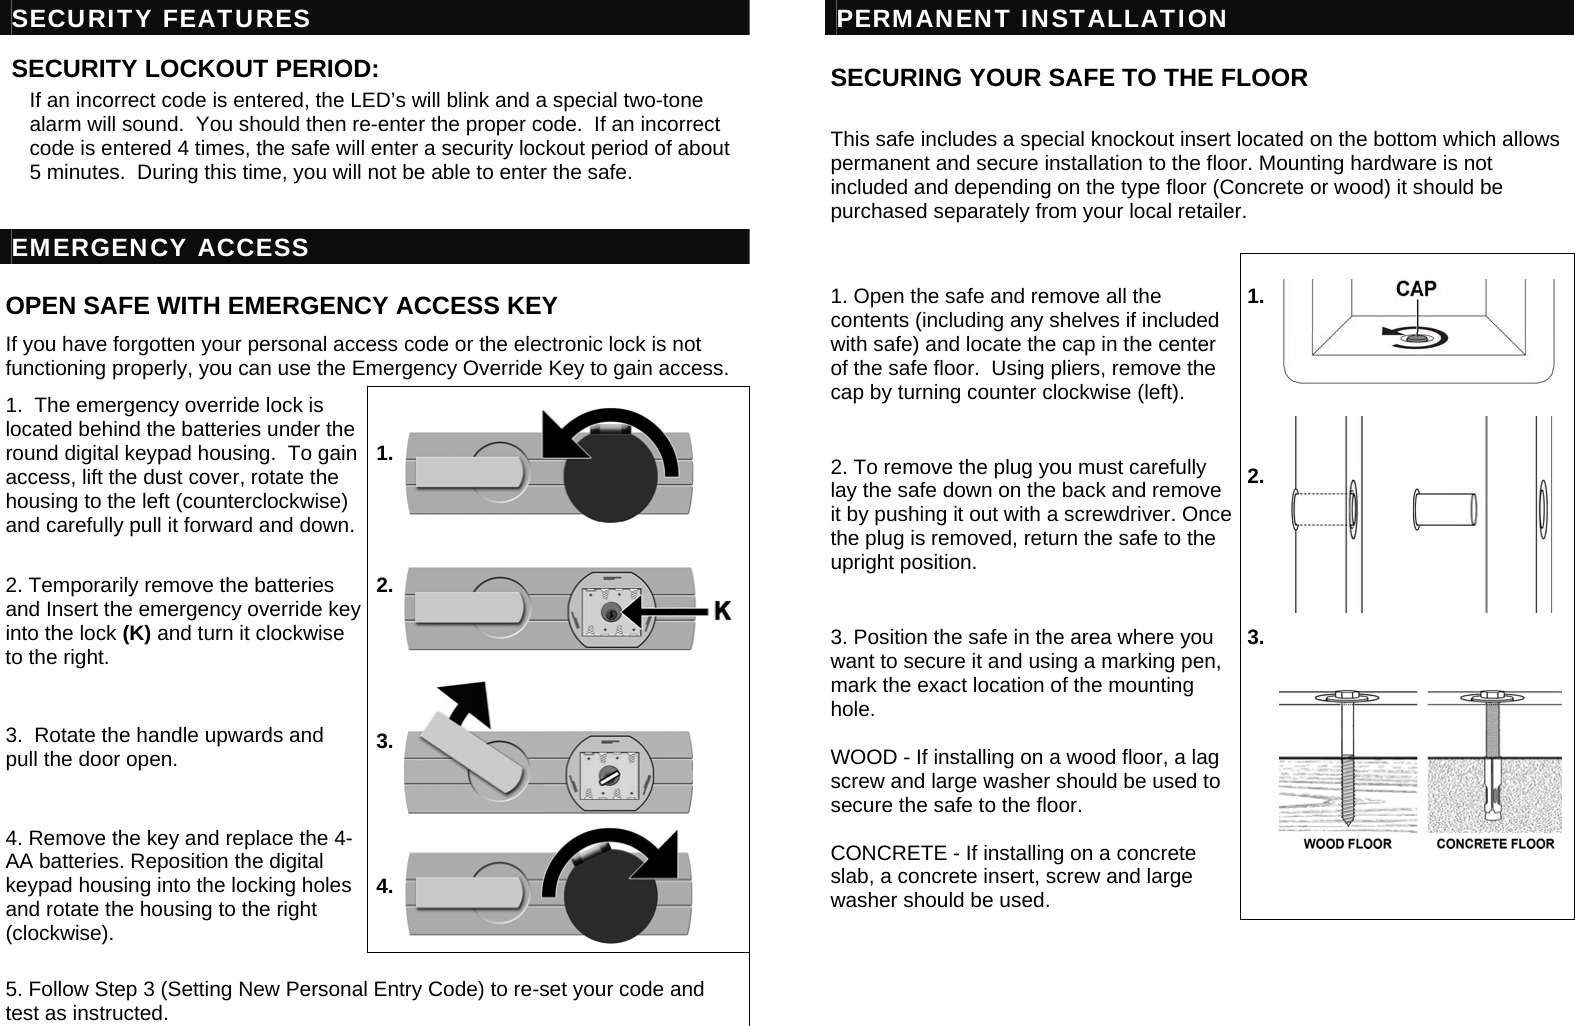 Page 4 of 6 - 2202&2204 Safe Owners Manual_English Only 9425-user-manual